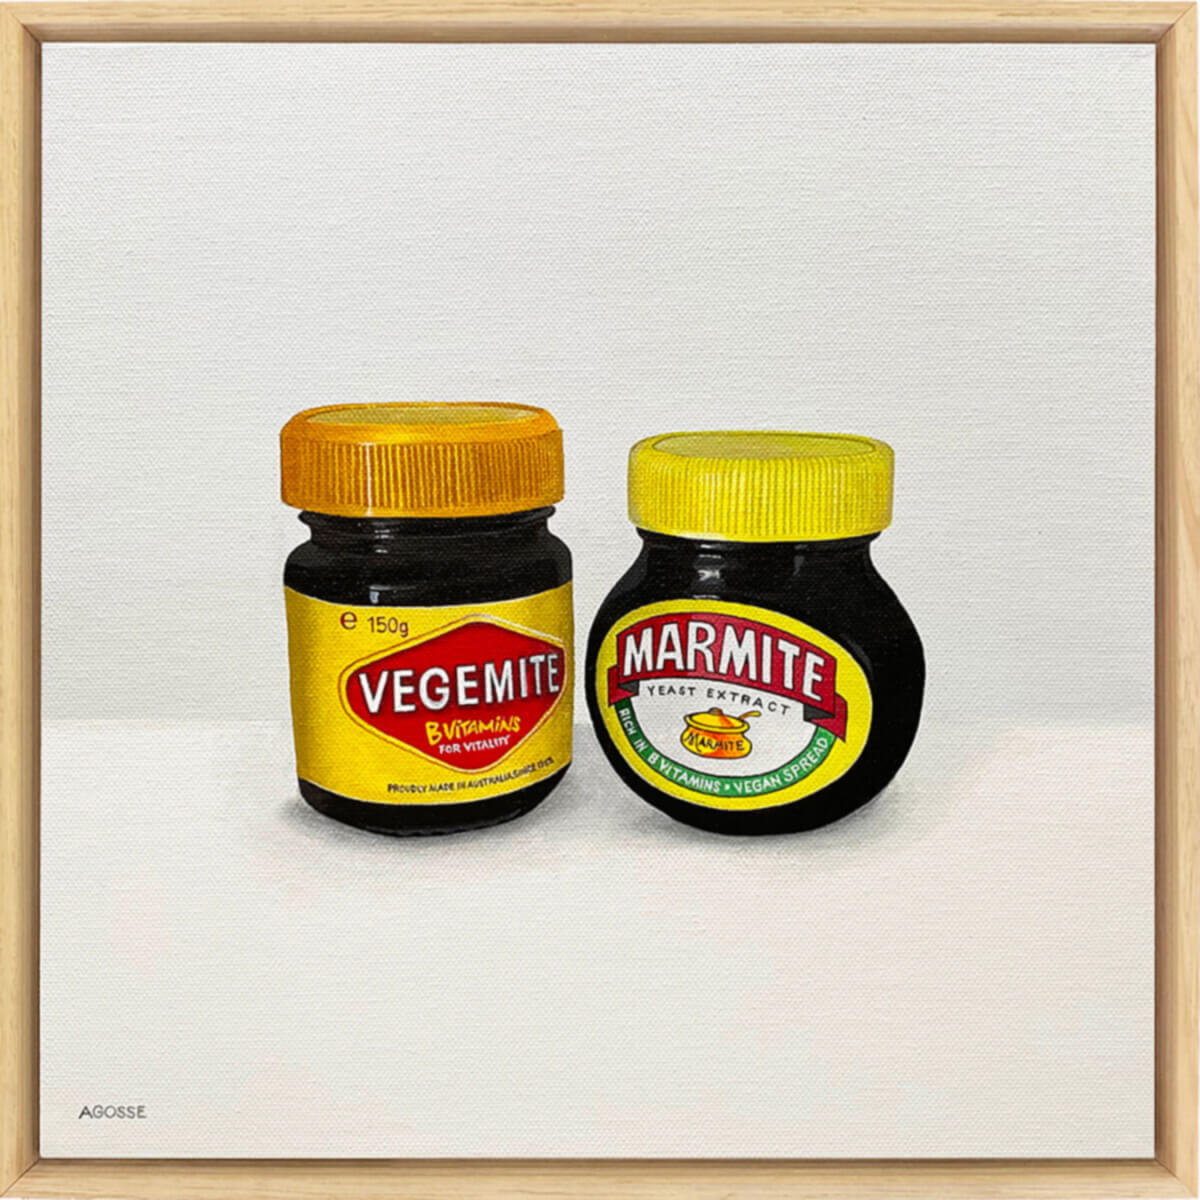 The Great Debate by Amanda Gosse acrylic on canvas Painting of British Marmite and Australian Vegemite jars within a wooden floating frame